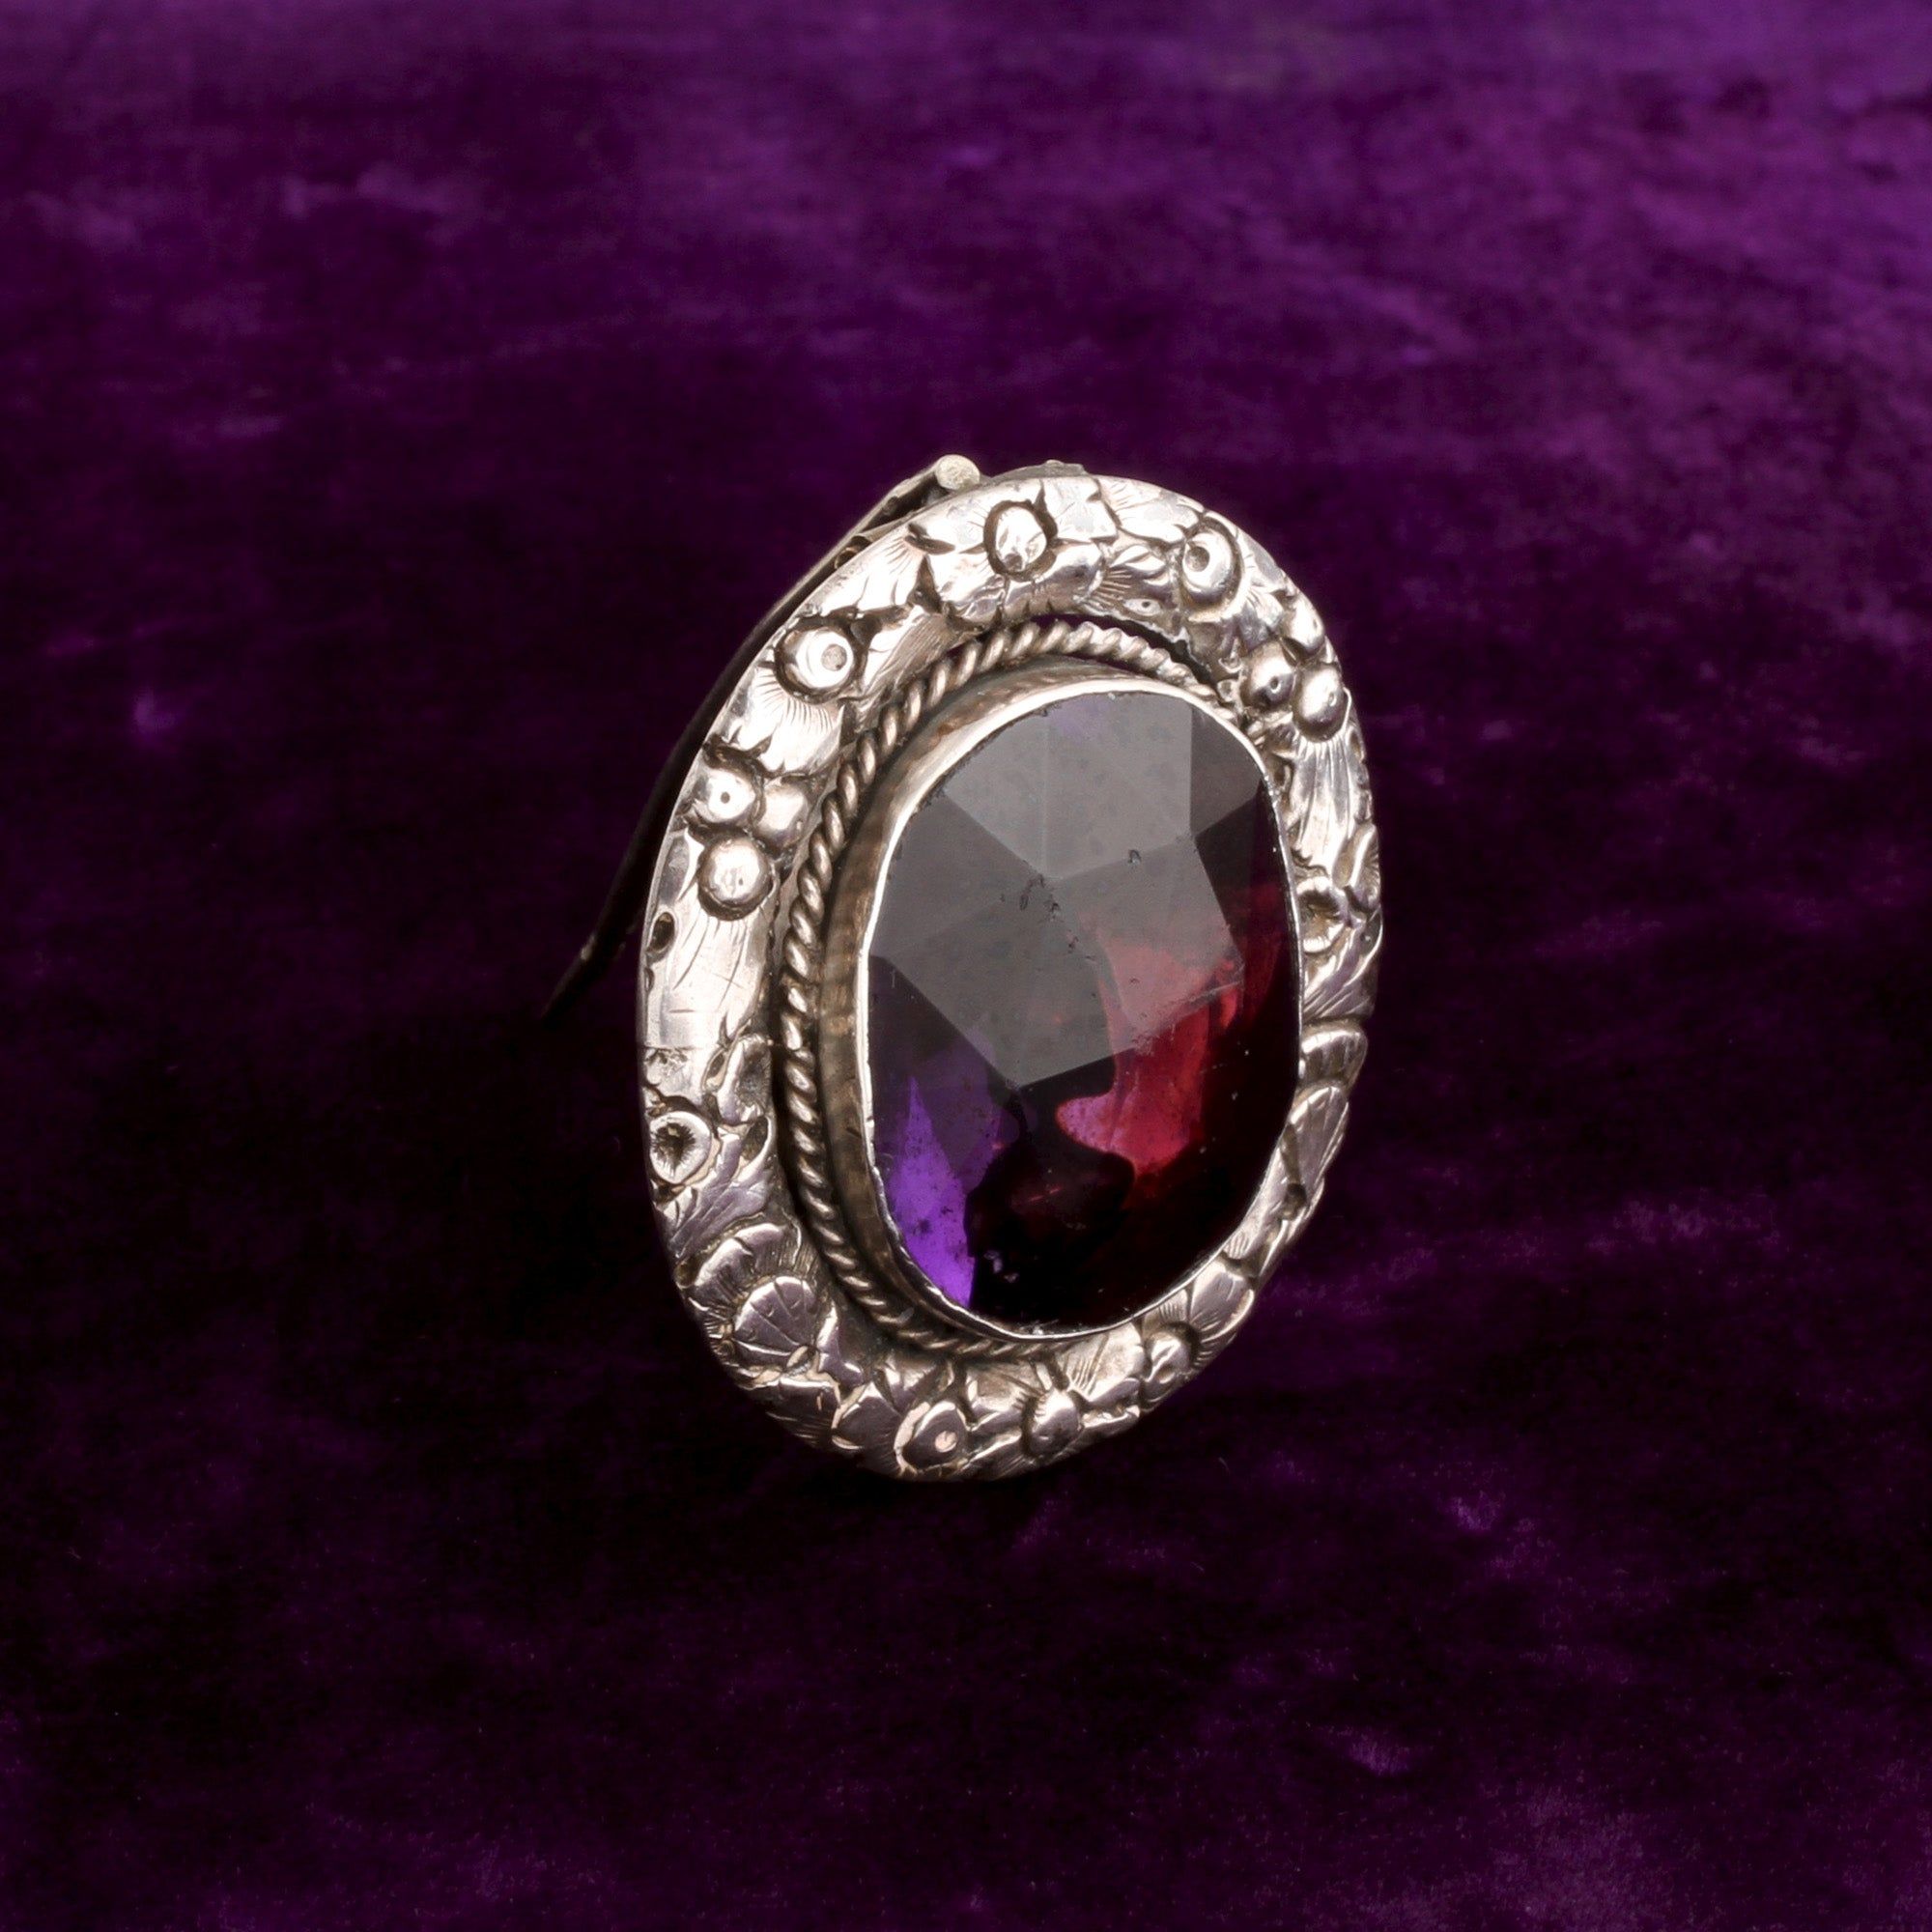 Detail of Victorian Amethyst Paste Cheapside Silver Brooch